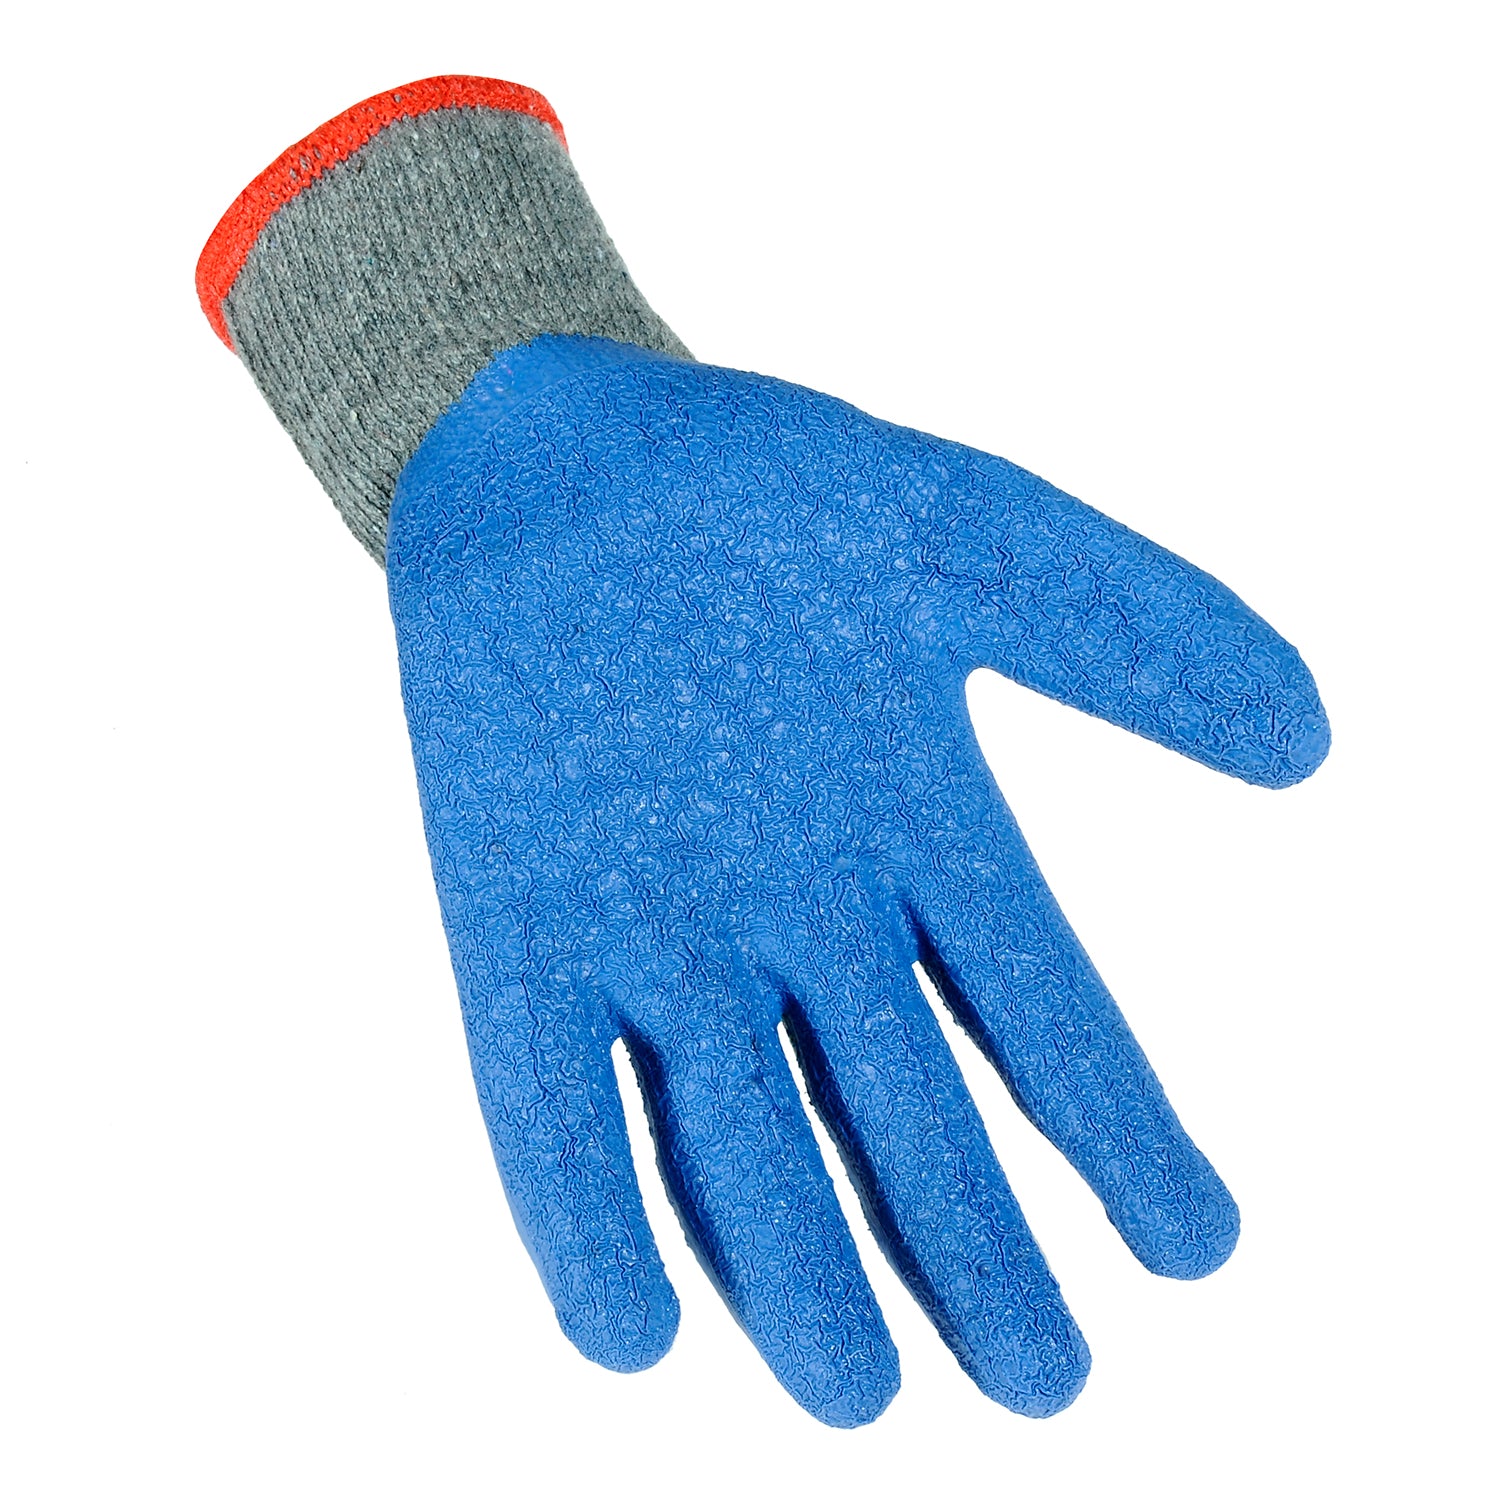 Grey With Blue Safety Gloves